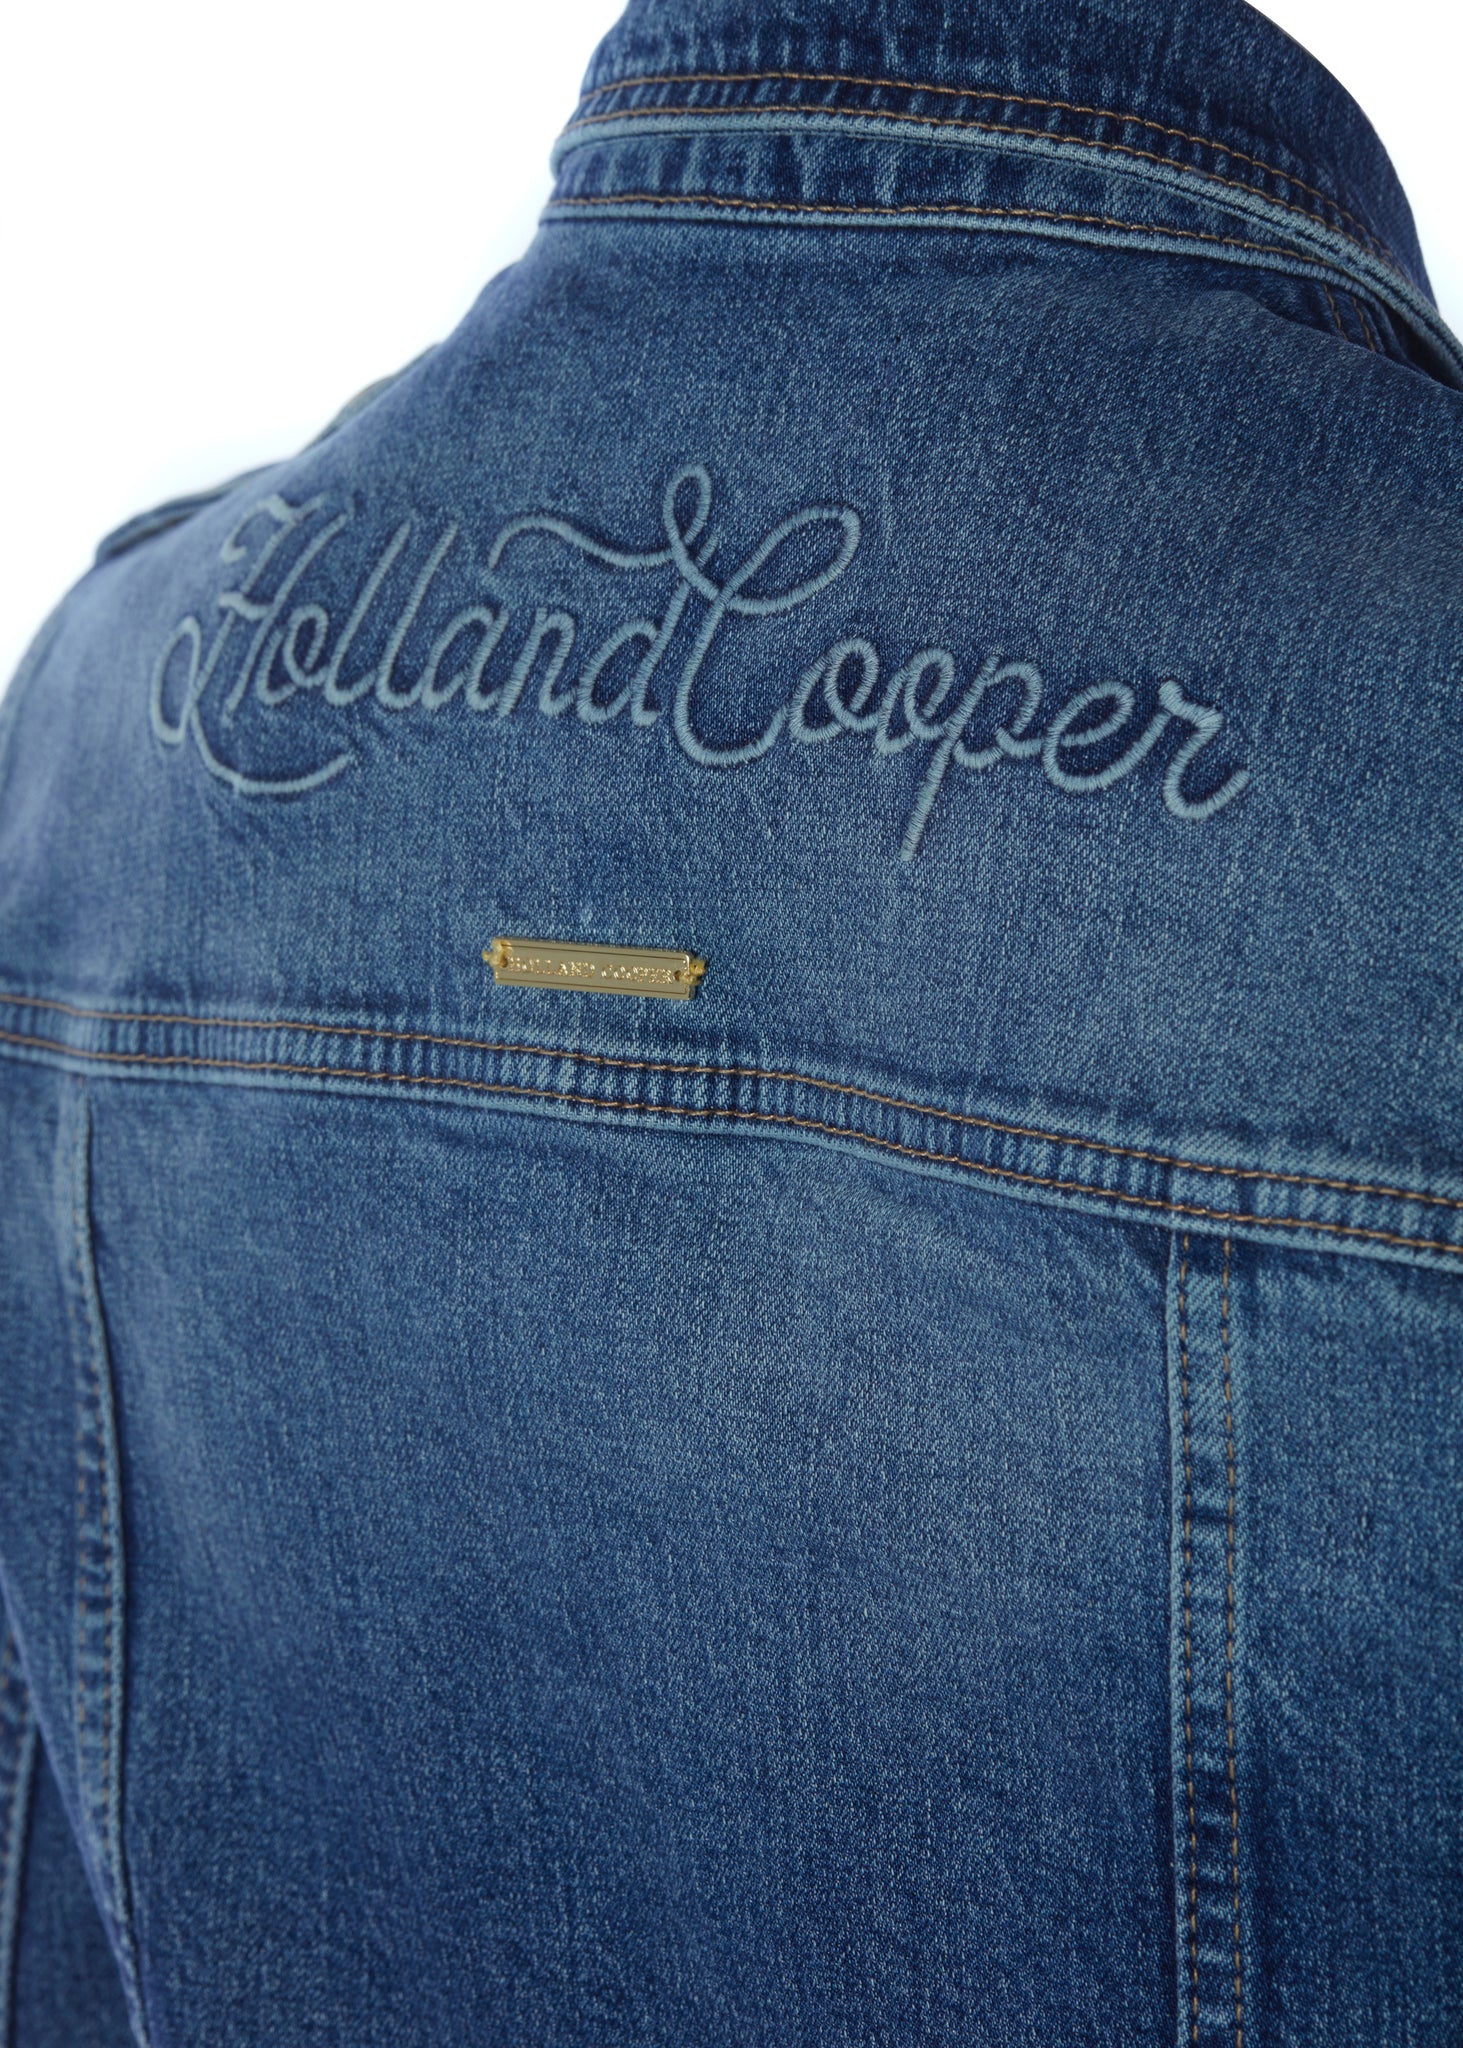 blue embroidery detail across back of classic indigo denim jacket waist length with gold buttons on front, pockets and cuffs with holland cooper embroidery on back